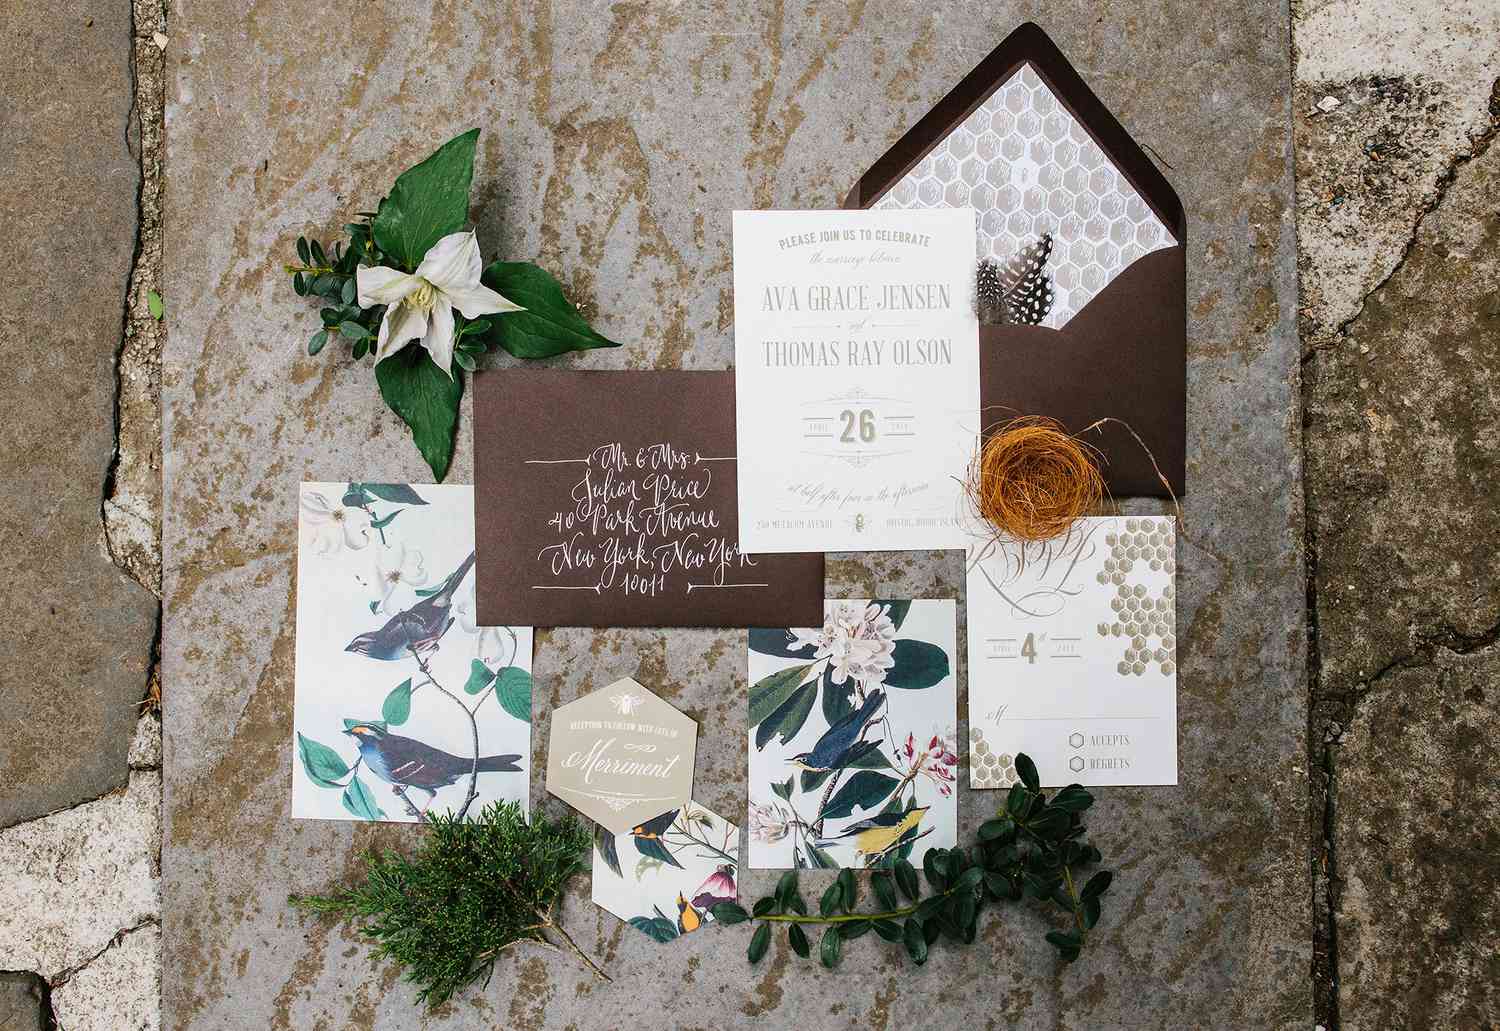 Honeycomb Wedding Inspiration, Invitation Suite with Honeycomb Liner and Motif on Invite